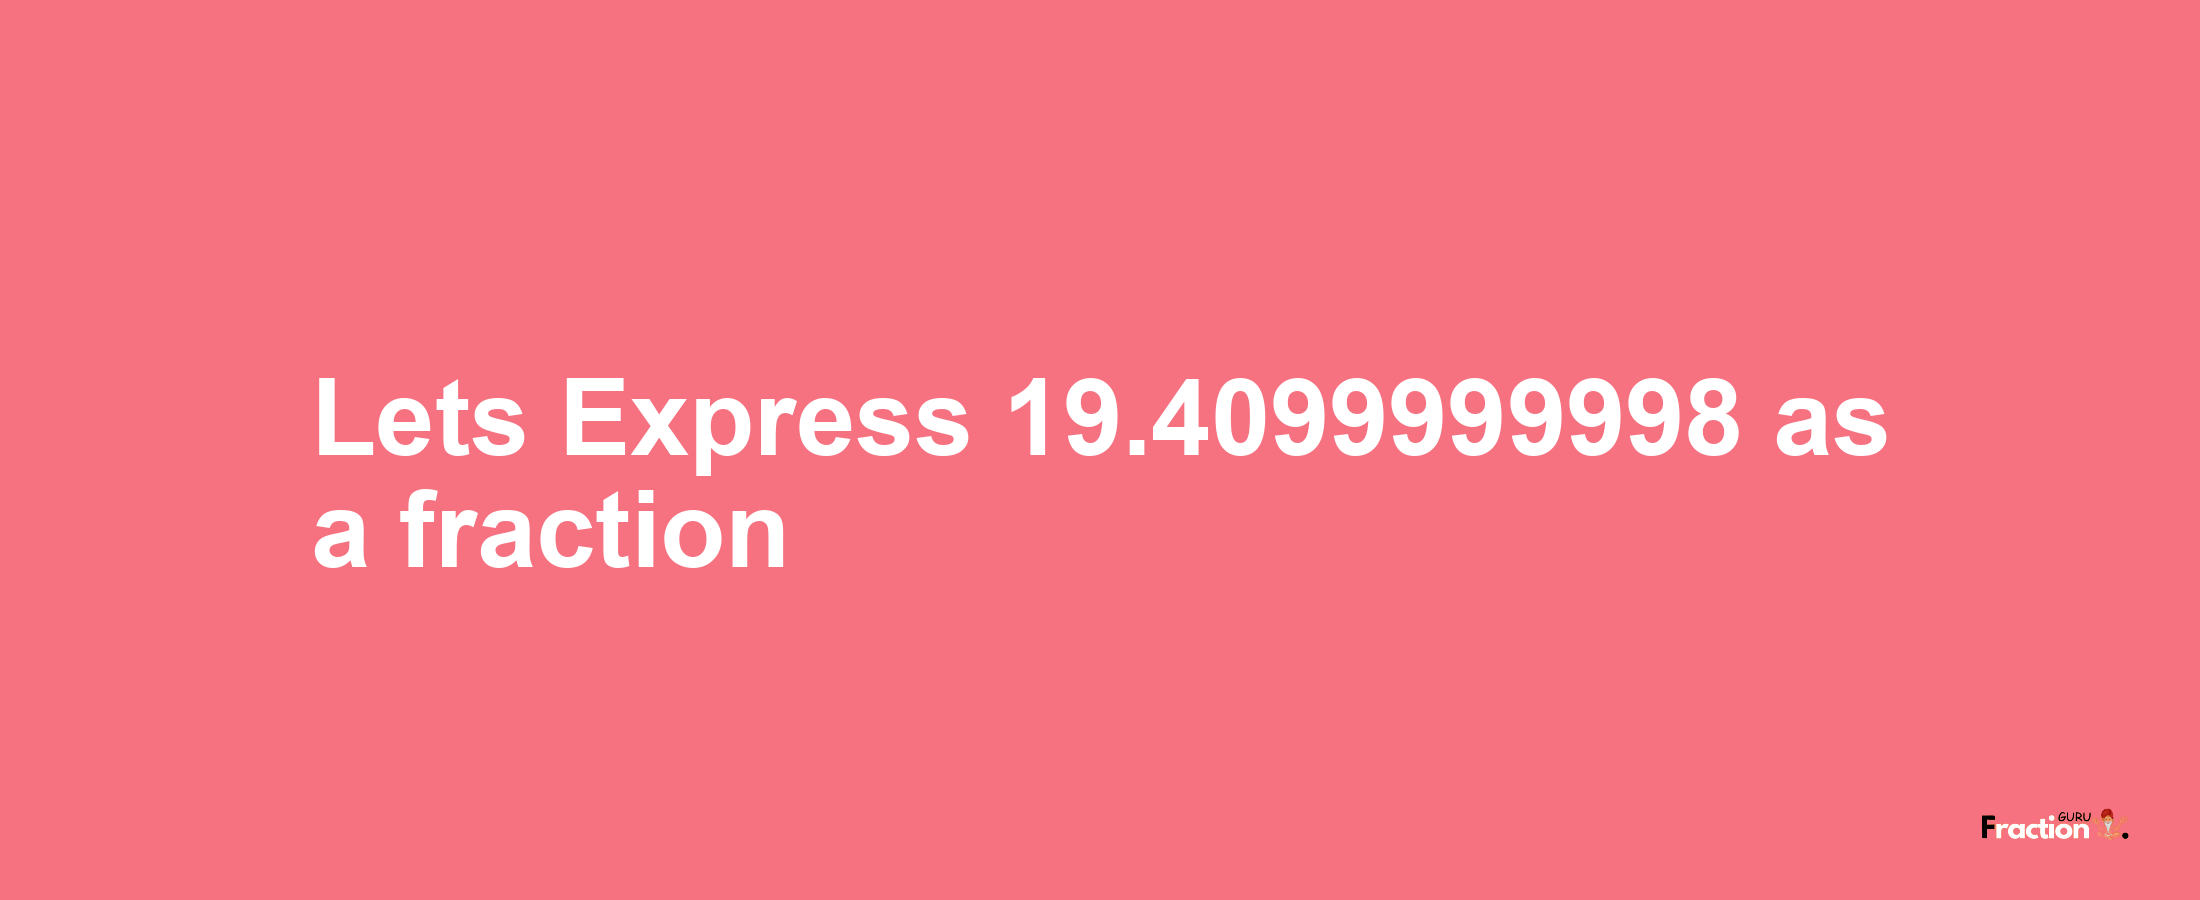 Lets Express 19.4099999998 as afraction